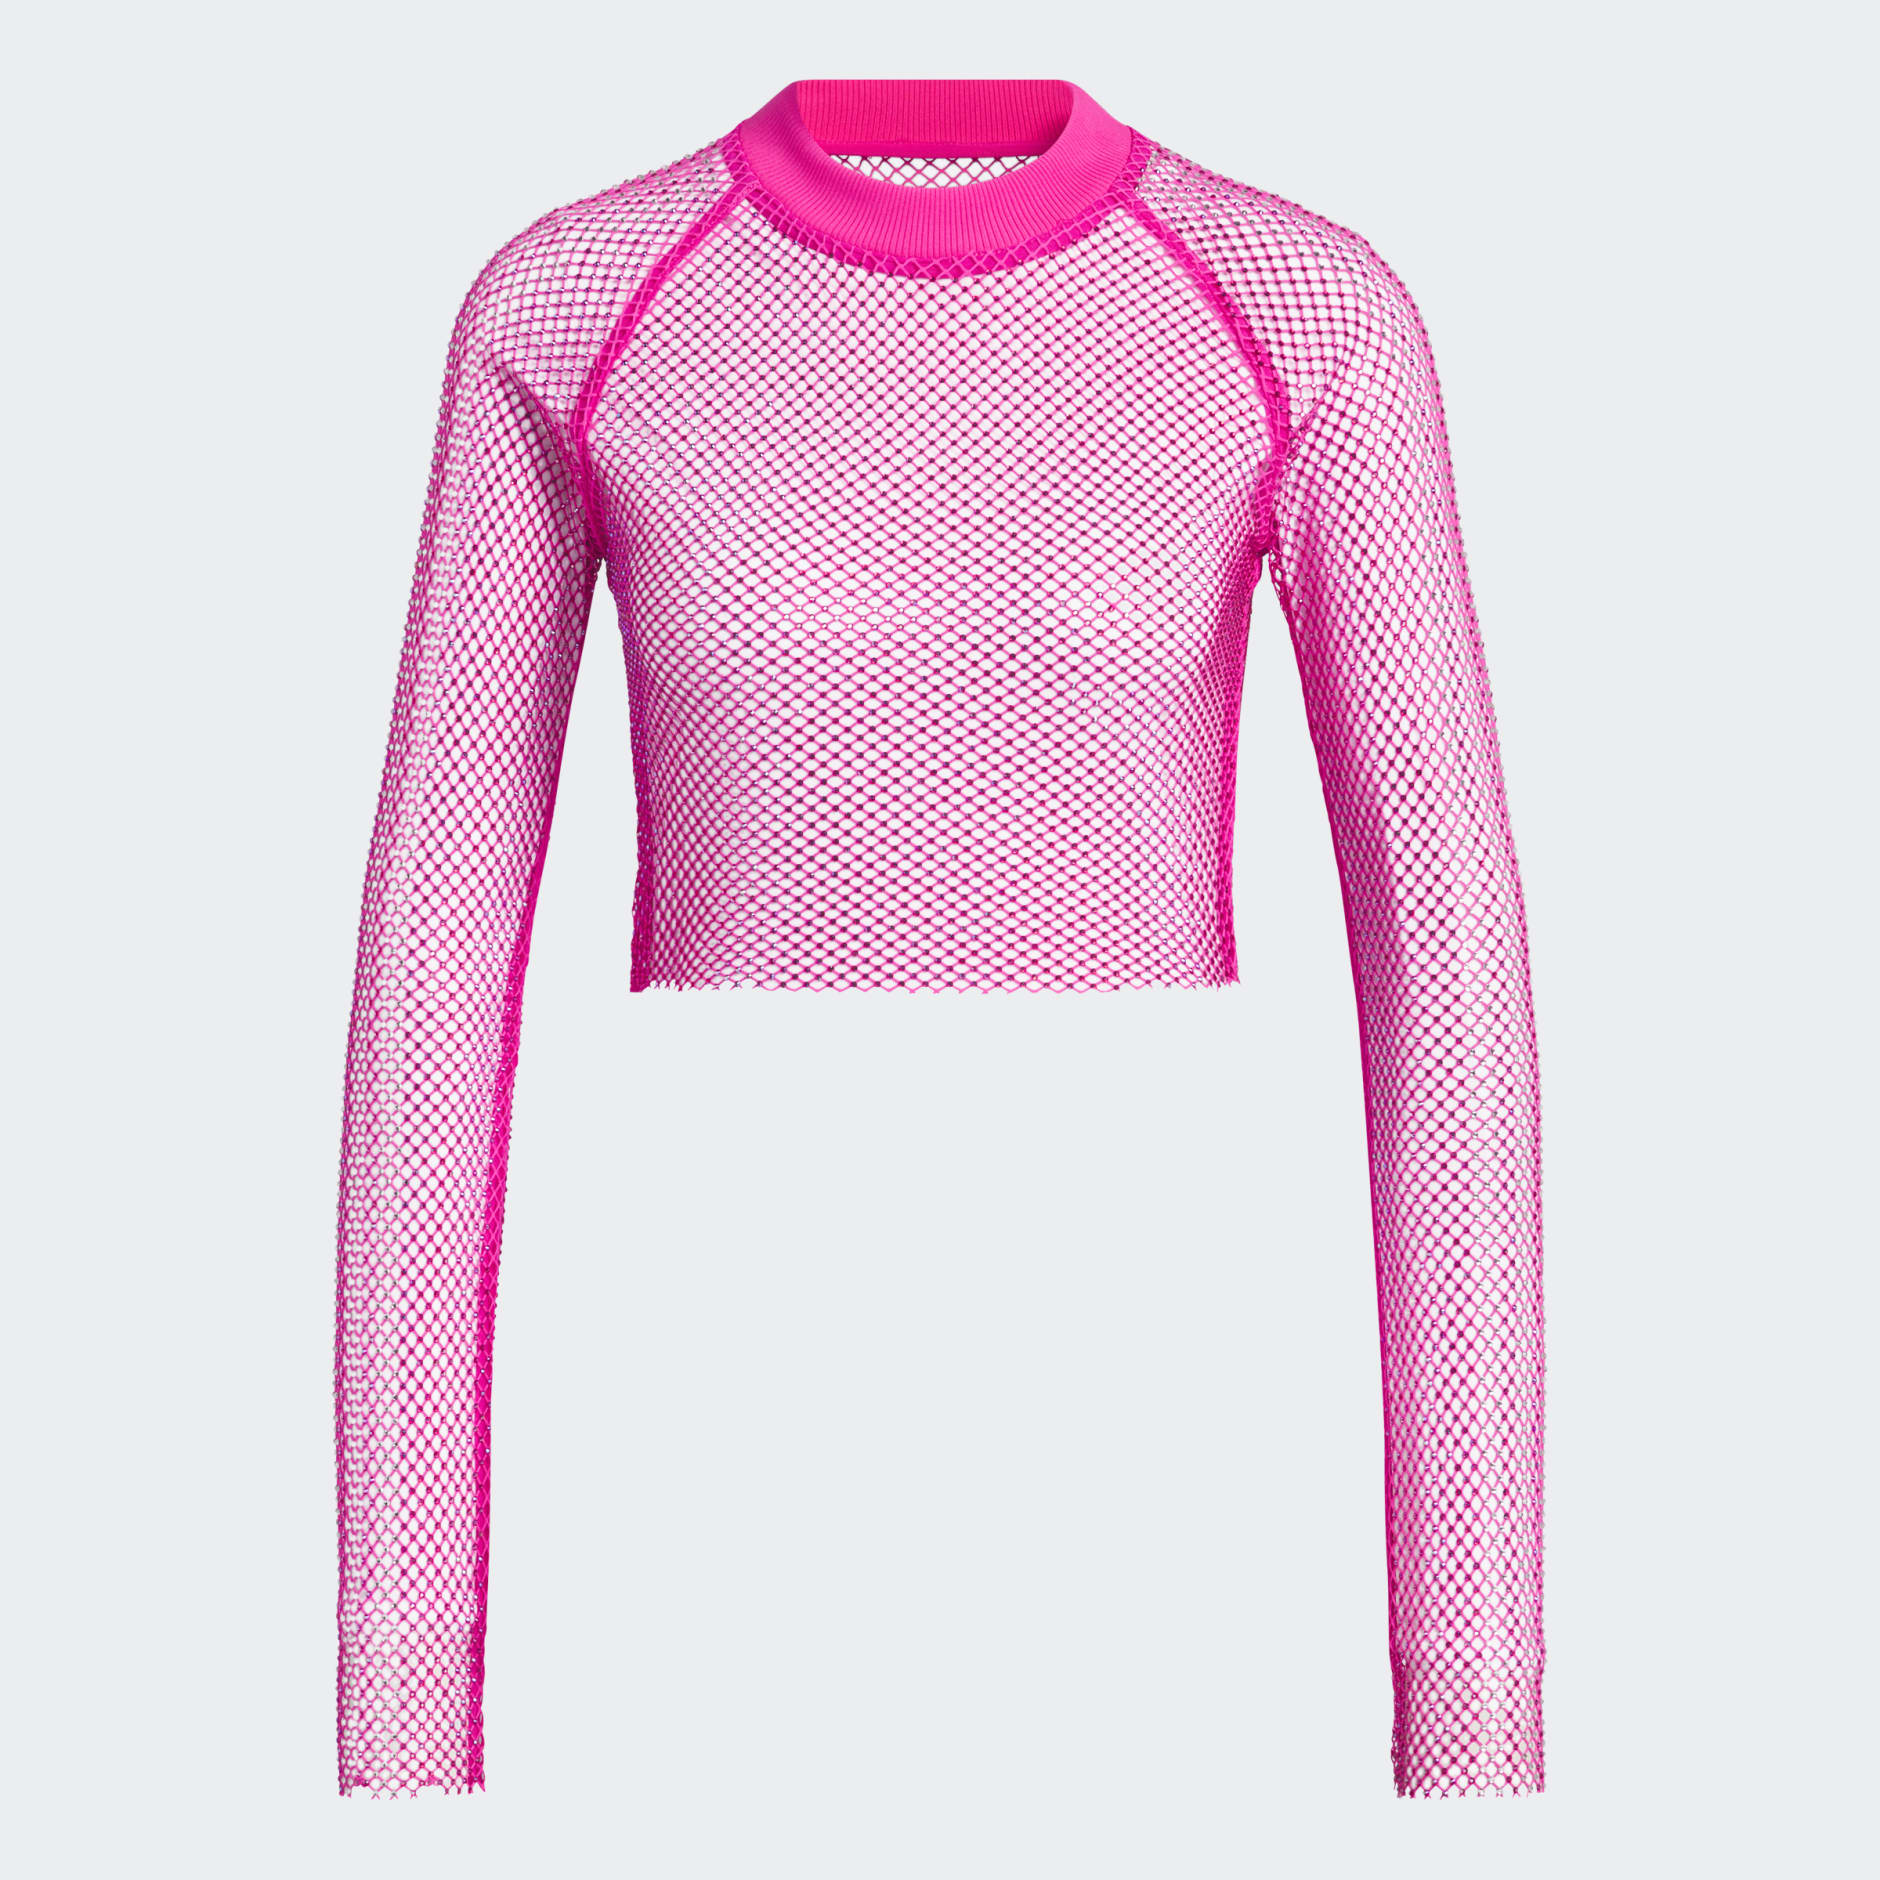 Women's Clothing - IVY PARK Crystal Mesh Cover-Up Top - Pink